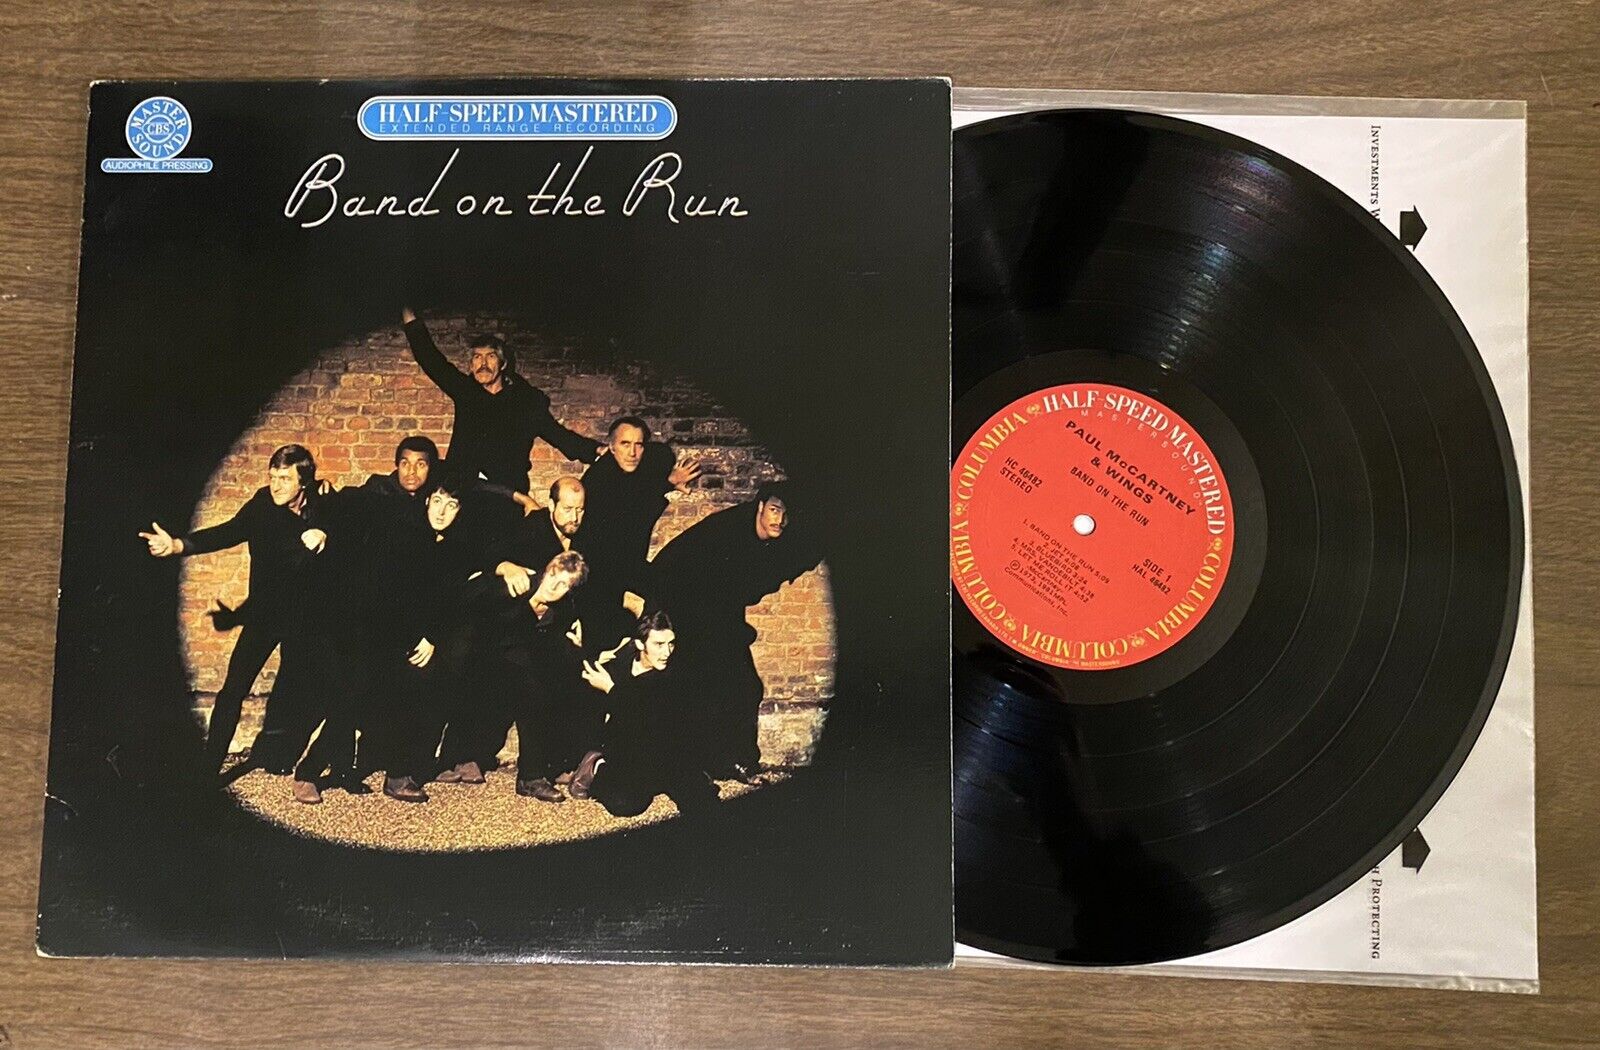 Paul McCartney/Wings Band On The Run CBS Mastersound Half-Speed Mastered Beatles